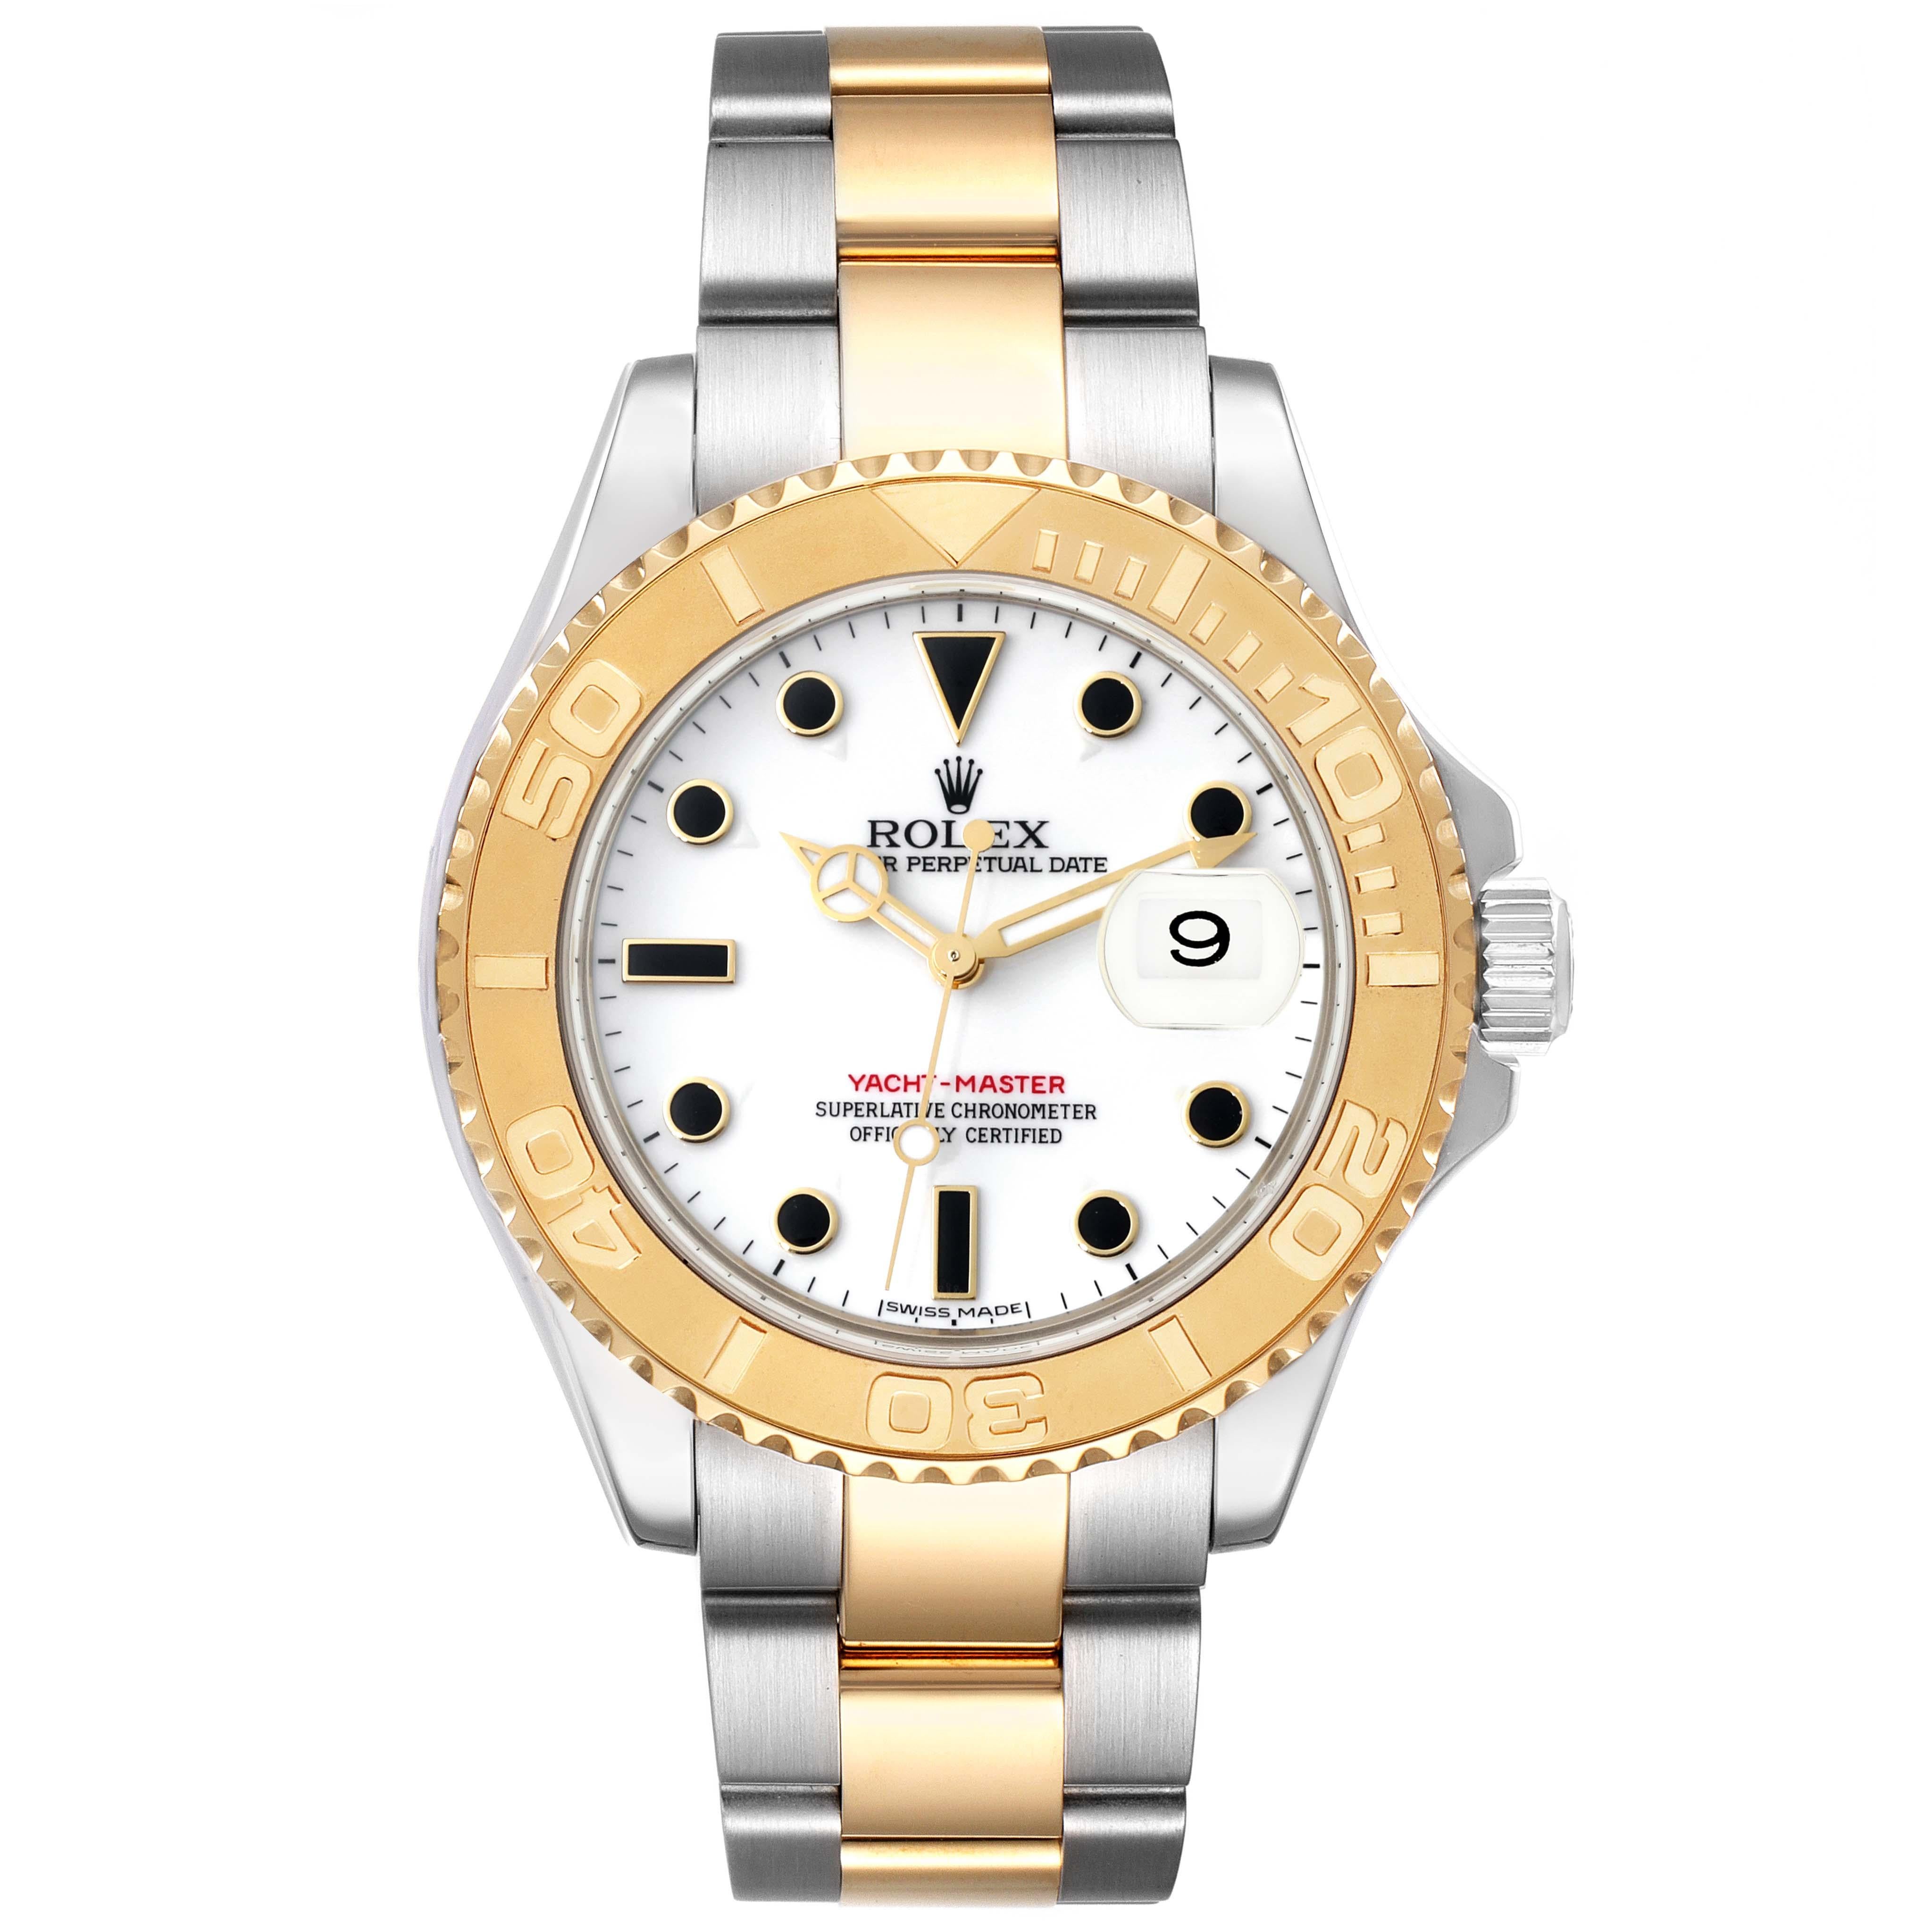 Rolex Yachtmaster Steel Yellow Gold White Dial Mens Watch 16623 Box Card. Officially certified chronometer automatic self-winding movement. Stainless steel case 40.0 mm in diameter. Rolex logo on the crown. 18k yellow gold special time-lapse